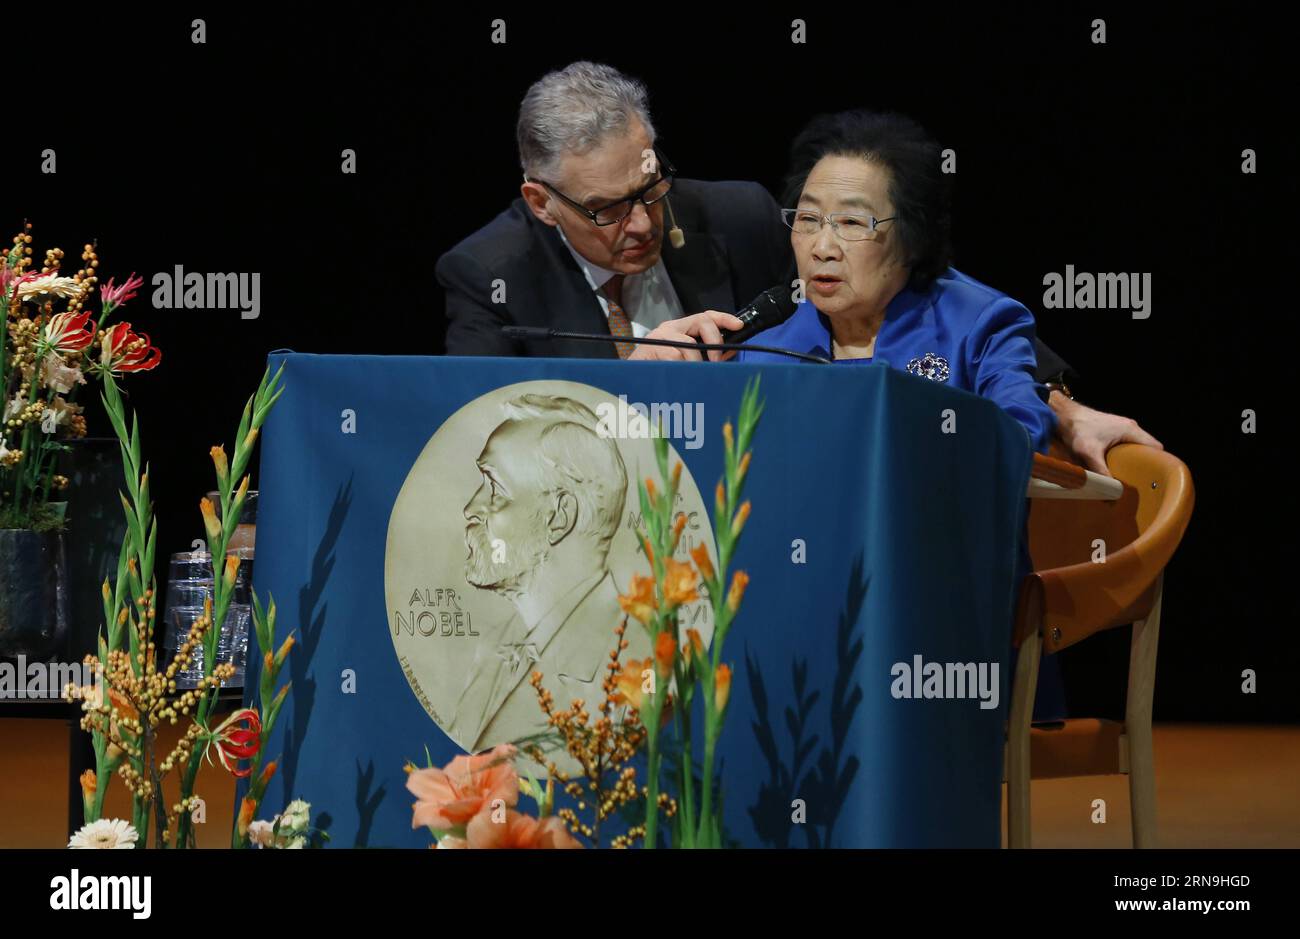 (151207) -- STOCKHOLM, Dec. 7, 2015 -- China s Tu Youyou (R) who won 2015 Nobel Prize in Physiology or Medicine gives a lecture in Karolinska Institutet, Stockholm, capital of Sweden, Dec. 7, 2015. ) SWEDEN-STOCKHOLM-NOBEL PRIZE-MEDICINE-LECTURE YexPingfan PUBLICATIONxNOTxINxCHN   151207 Stockholm DEC 7 2015 China S TU Youyou r Who Won 2015 Nobel Prize in Physiology or Medicine Gives a Lecture in Karolinska Institutet Stockholm Capital of Sweden DEC 7 2015 Sweden Stockholm Nobel Prize Medicine Lecture YexPingfan PUBLICATIONxNOTxINxCHN Stock Photo